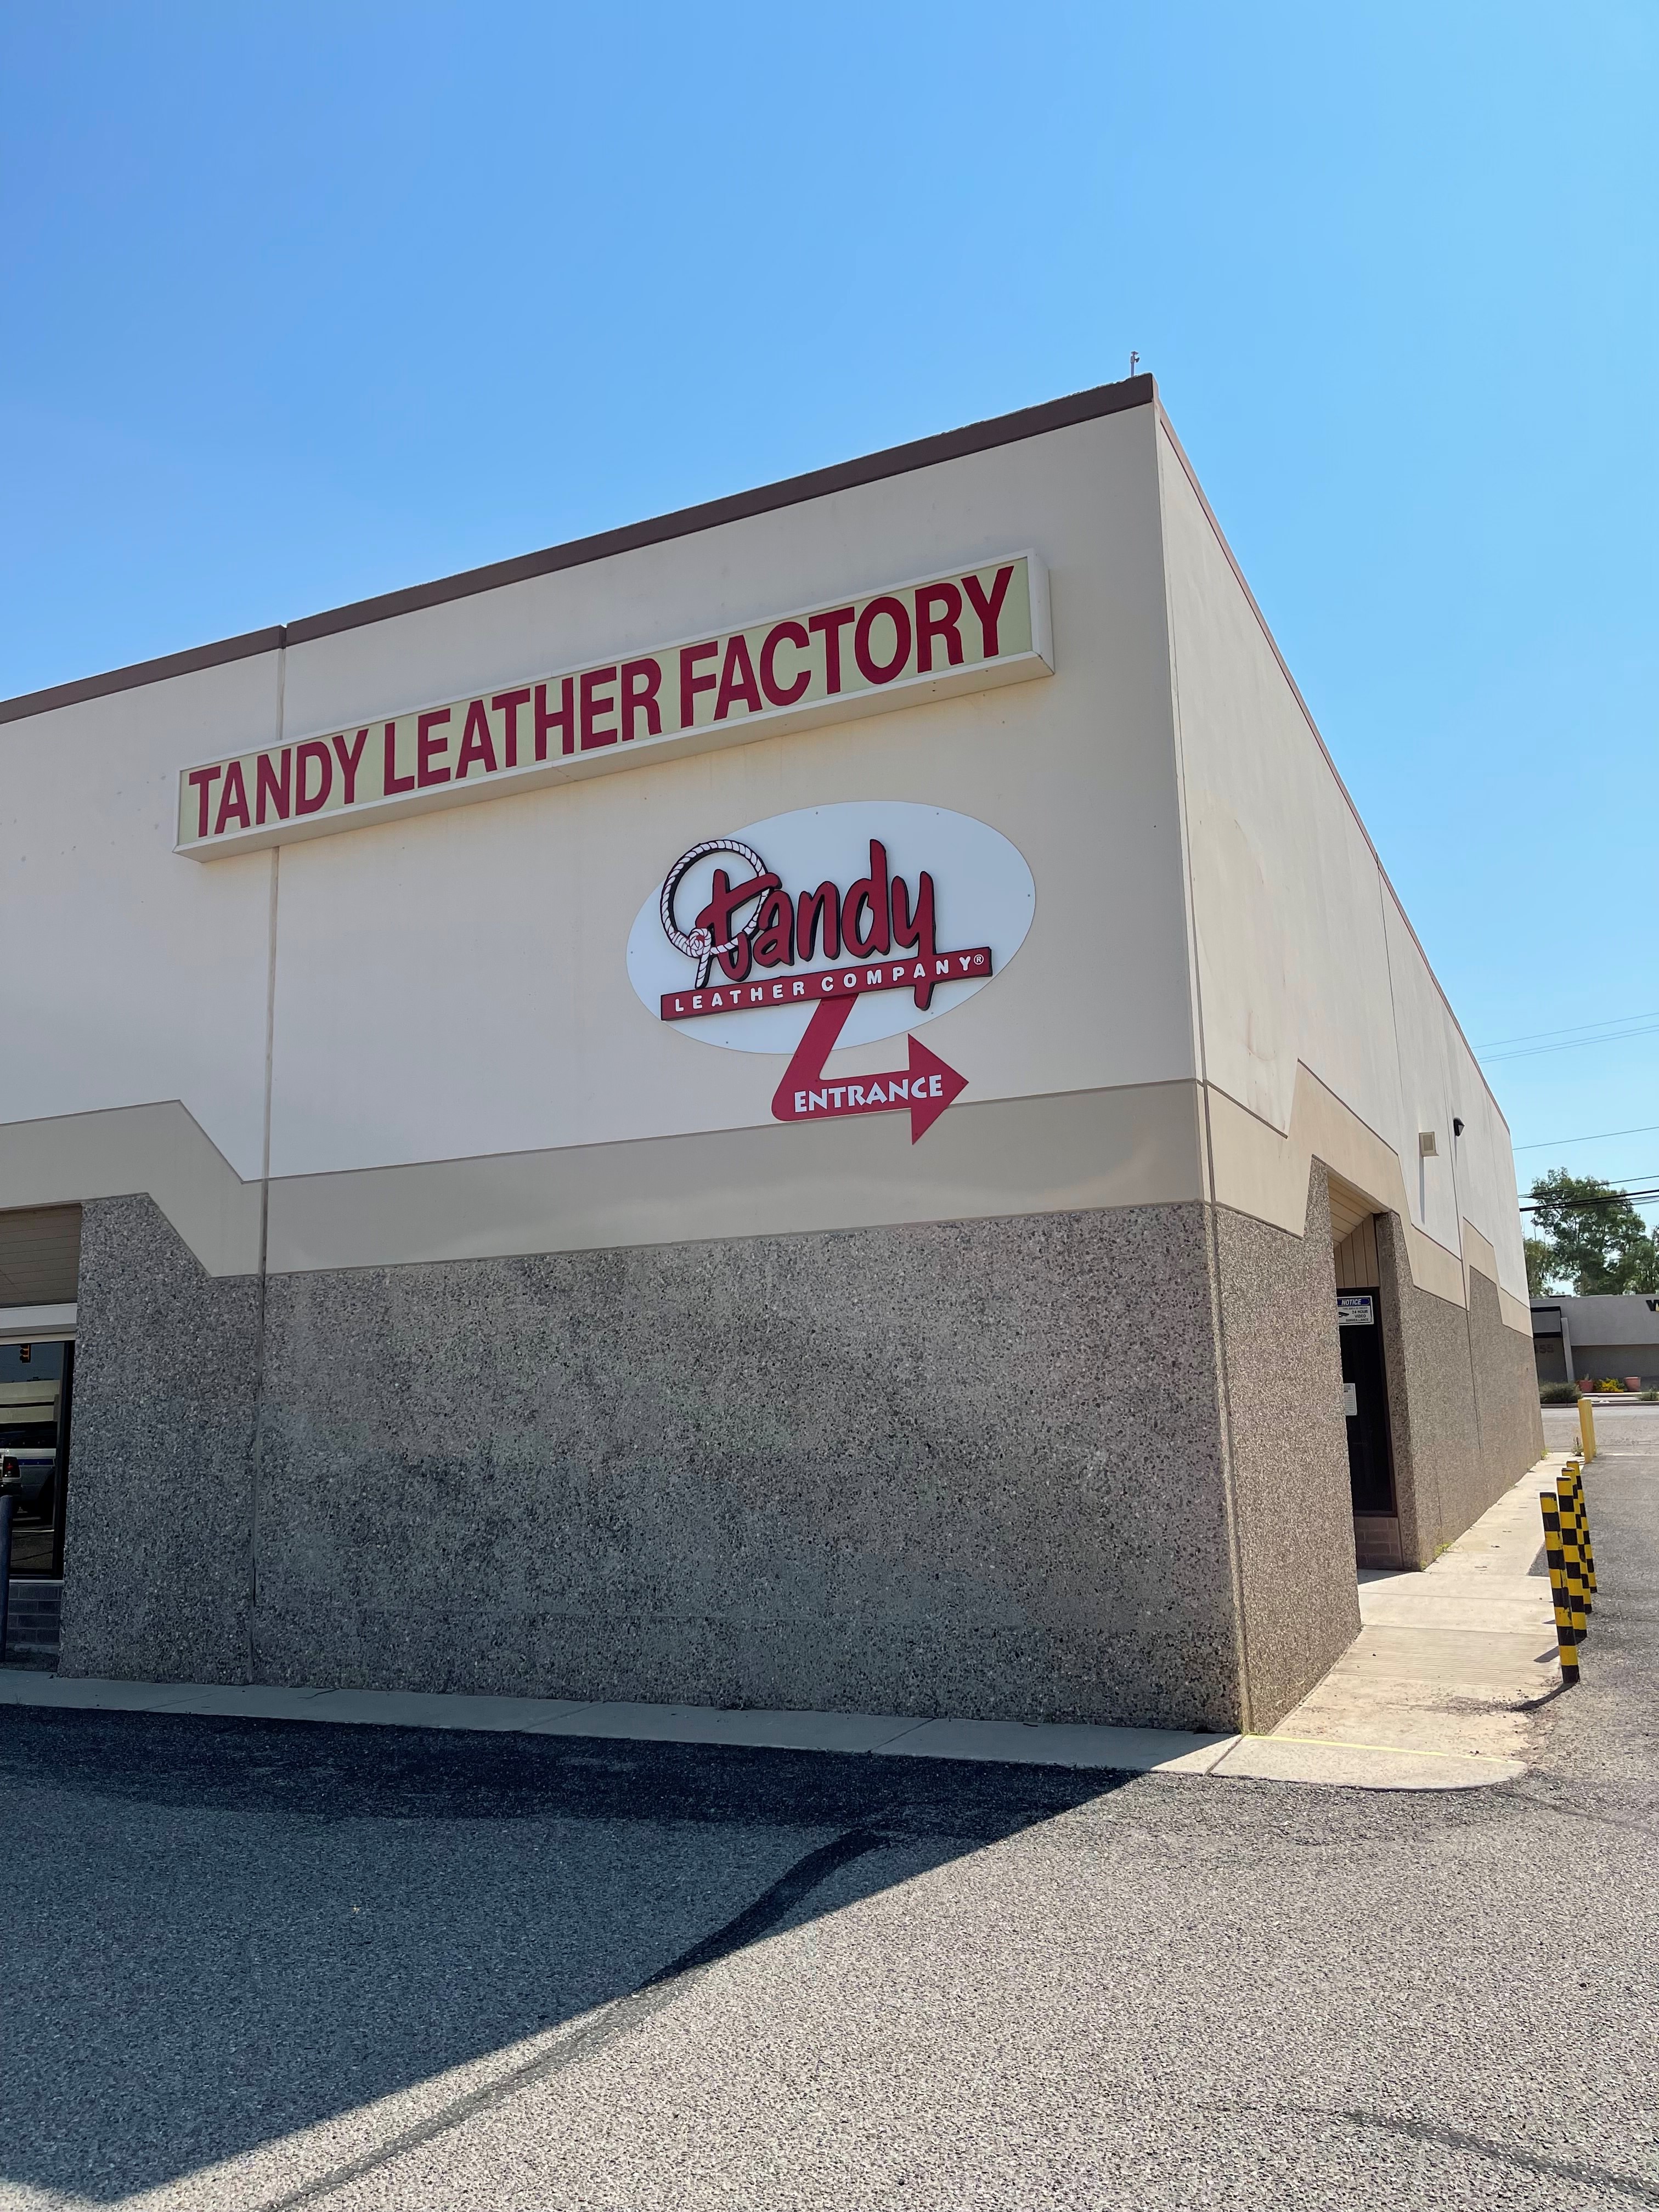 Tucson Store #25 — Tandy Leather, Inc.